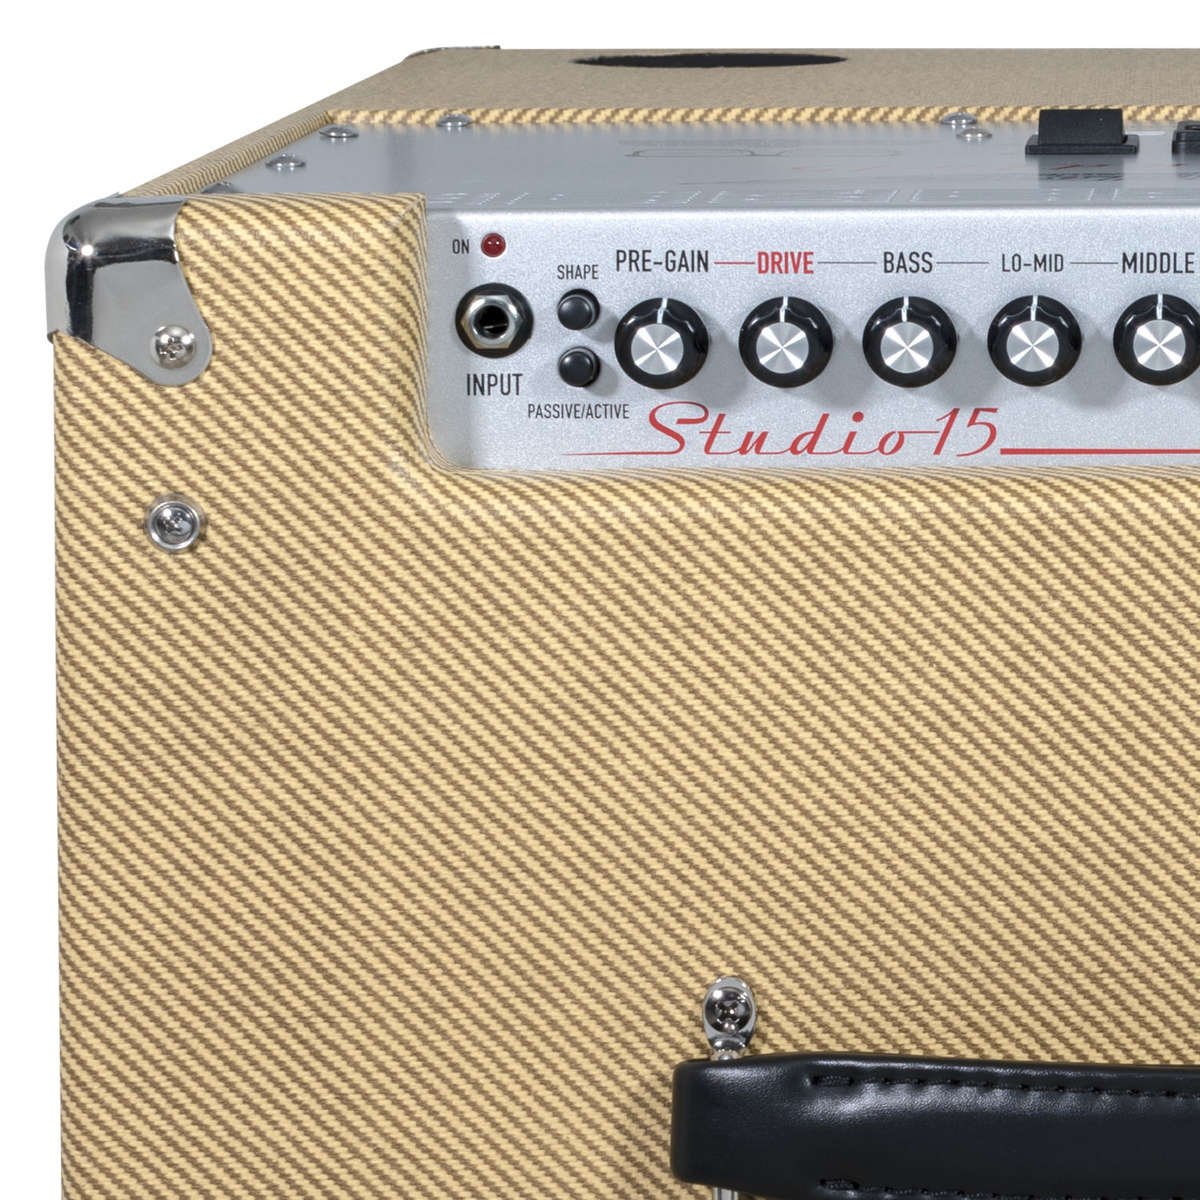 Ashdown Studio 15 Tweed Amp Controls. Pre-Gain, Drive, Bass, Lo-Mid and Middle